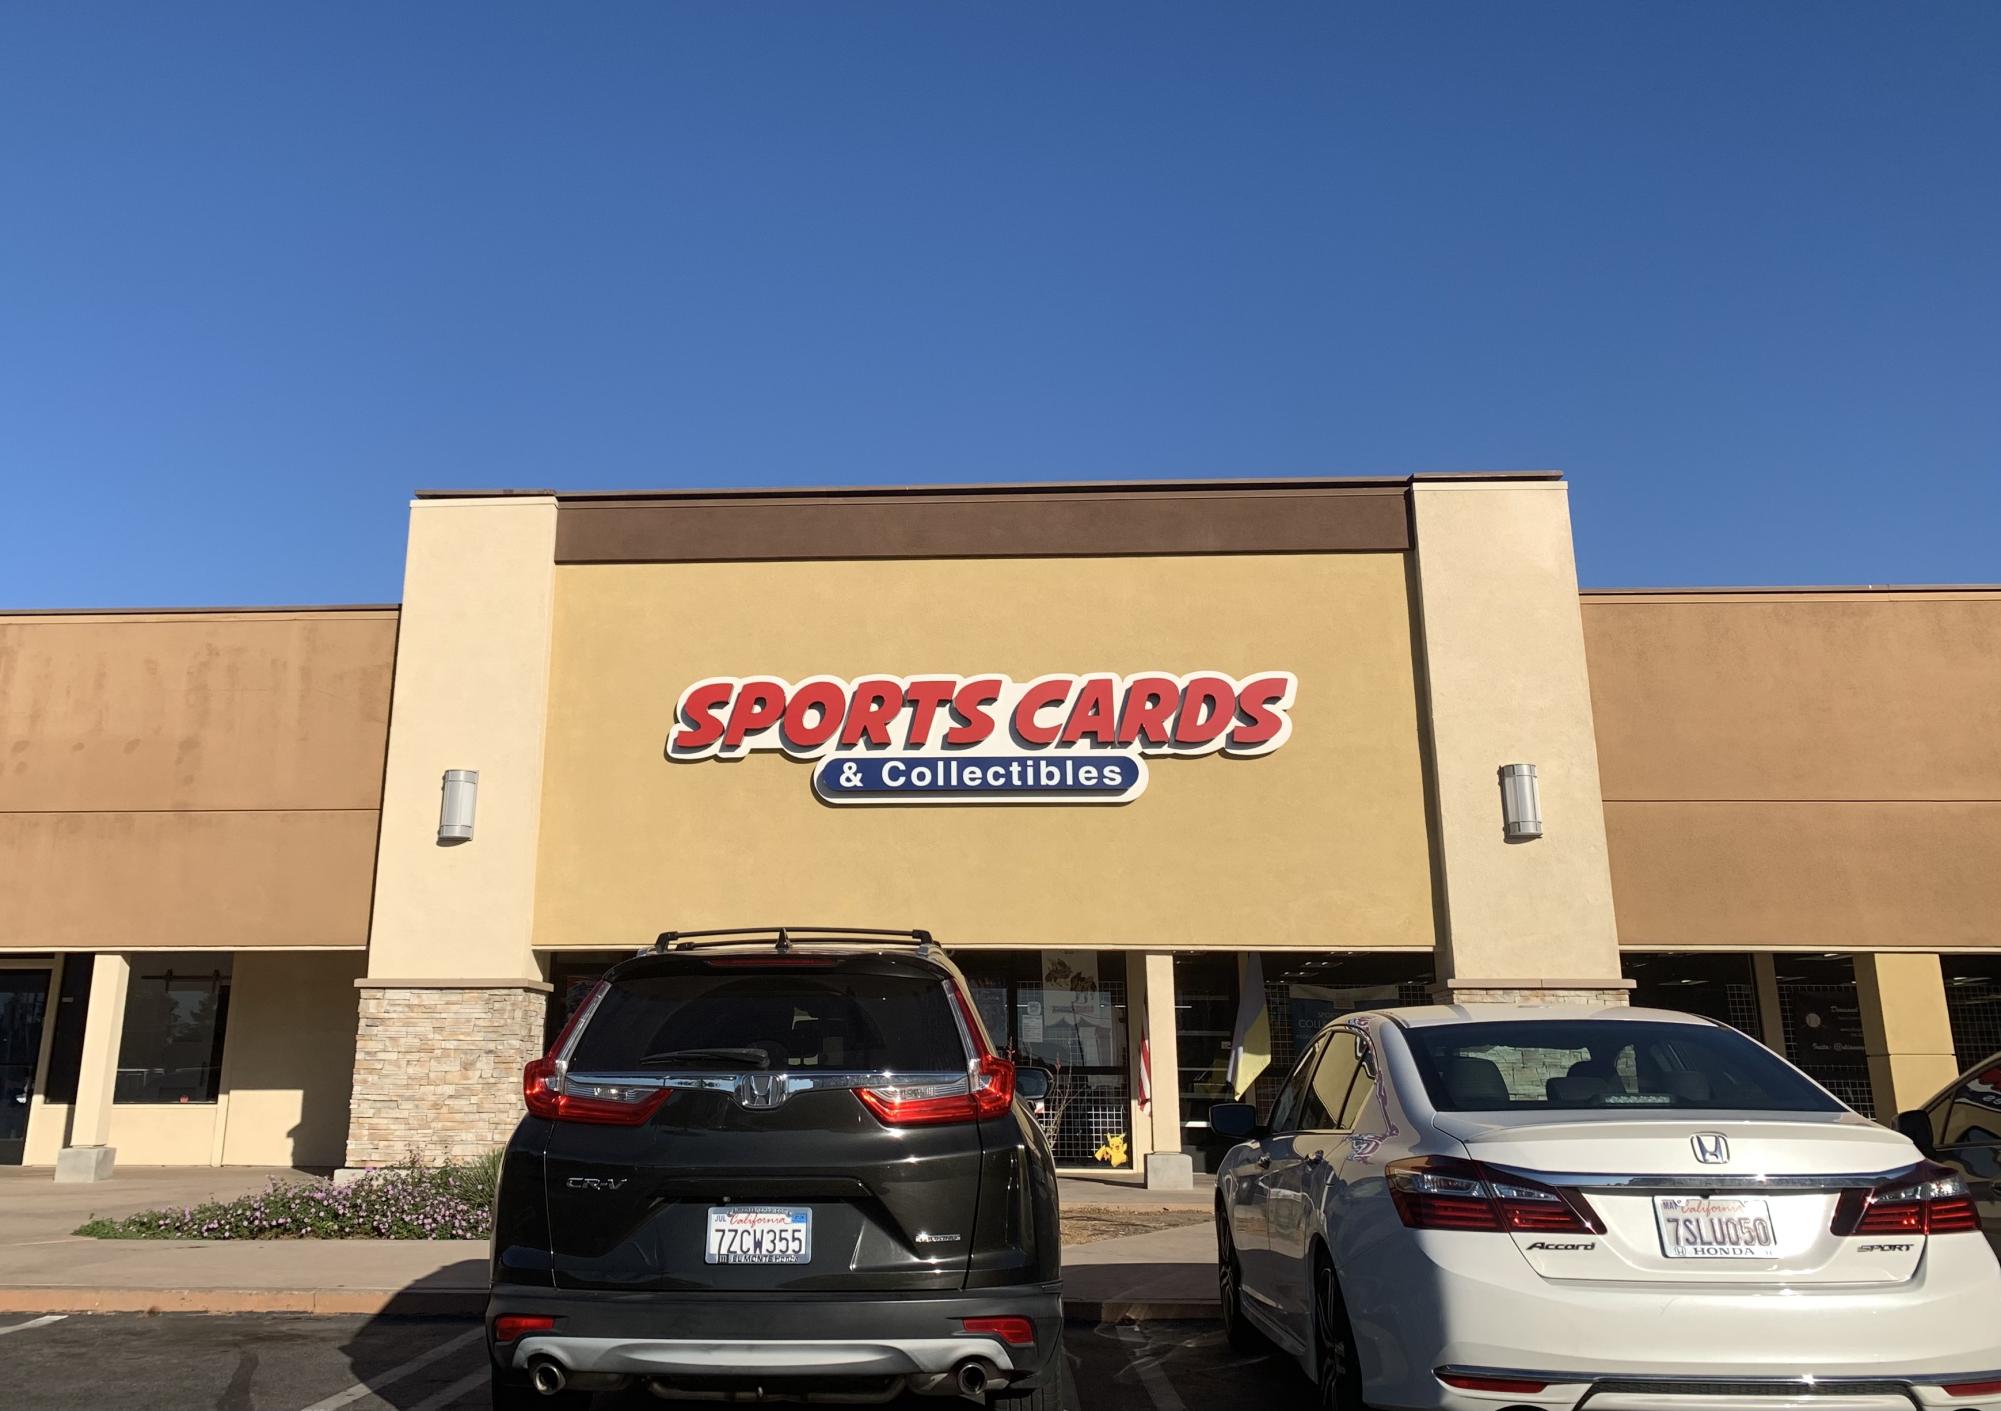 Diamond 9 Sports Cards (located in Placentia) has free Sports and Trading Card Game Collectible Shows every Wednesday and Saturday.